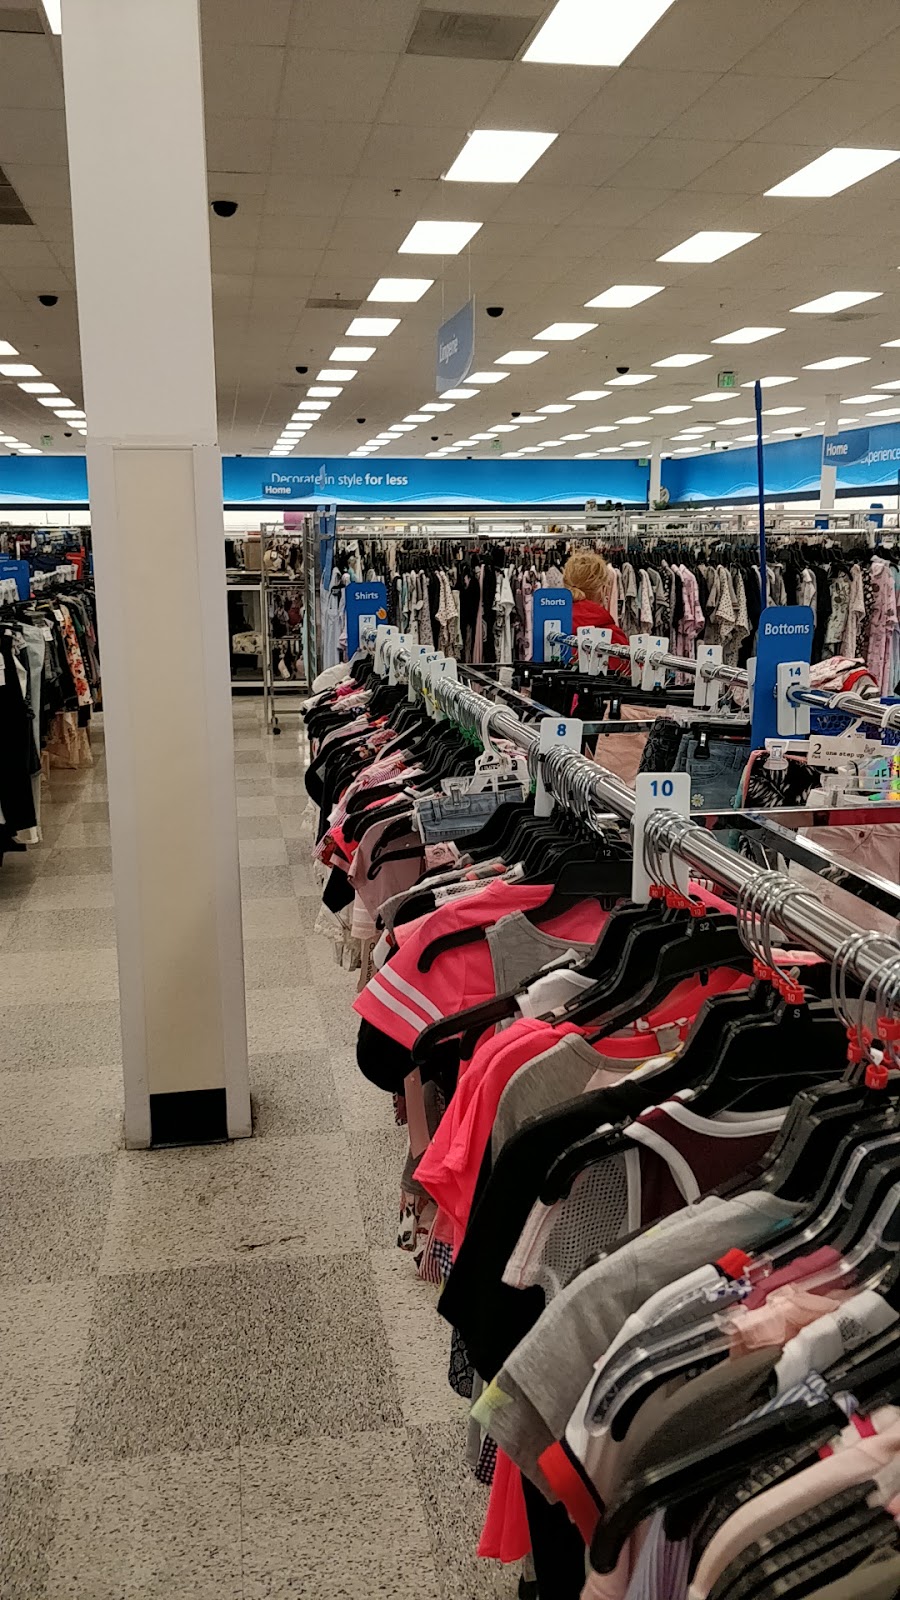 Ross Dress for Less | 20 N West End Blvd, Quakertown, PA 18951 | Phone: (215) 536-4680